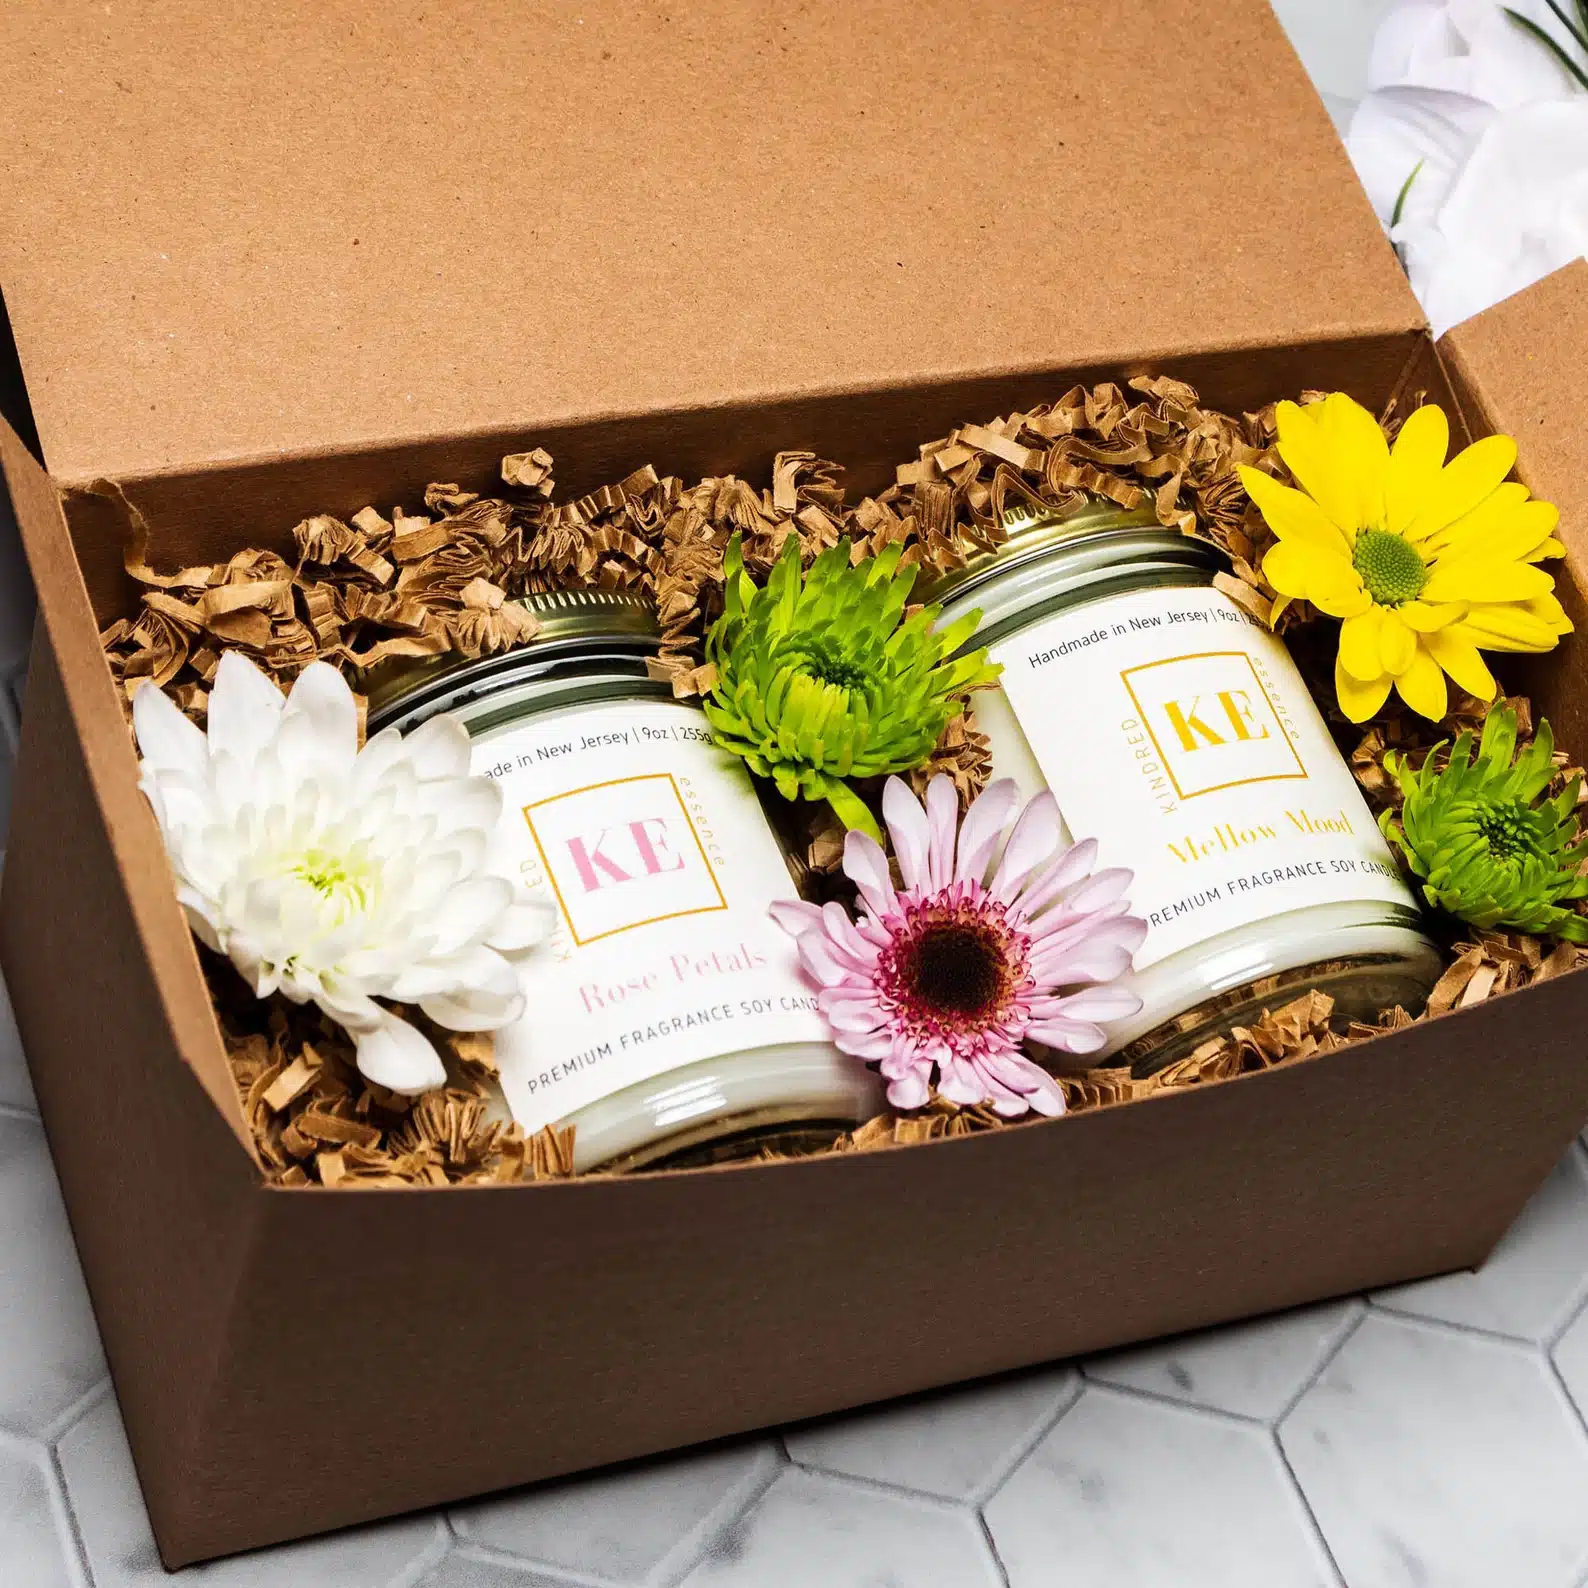 2-piece Handmade Soy Candle Gift Set